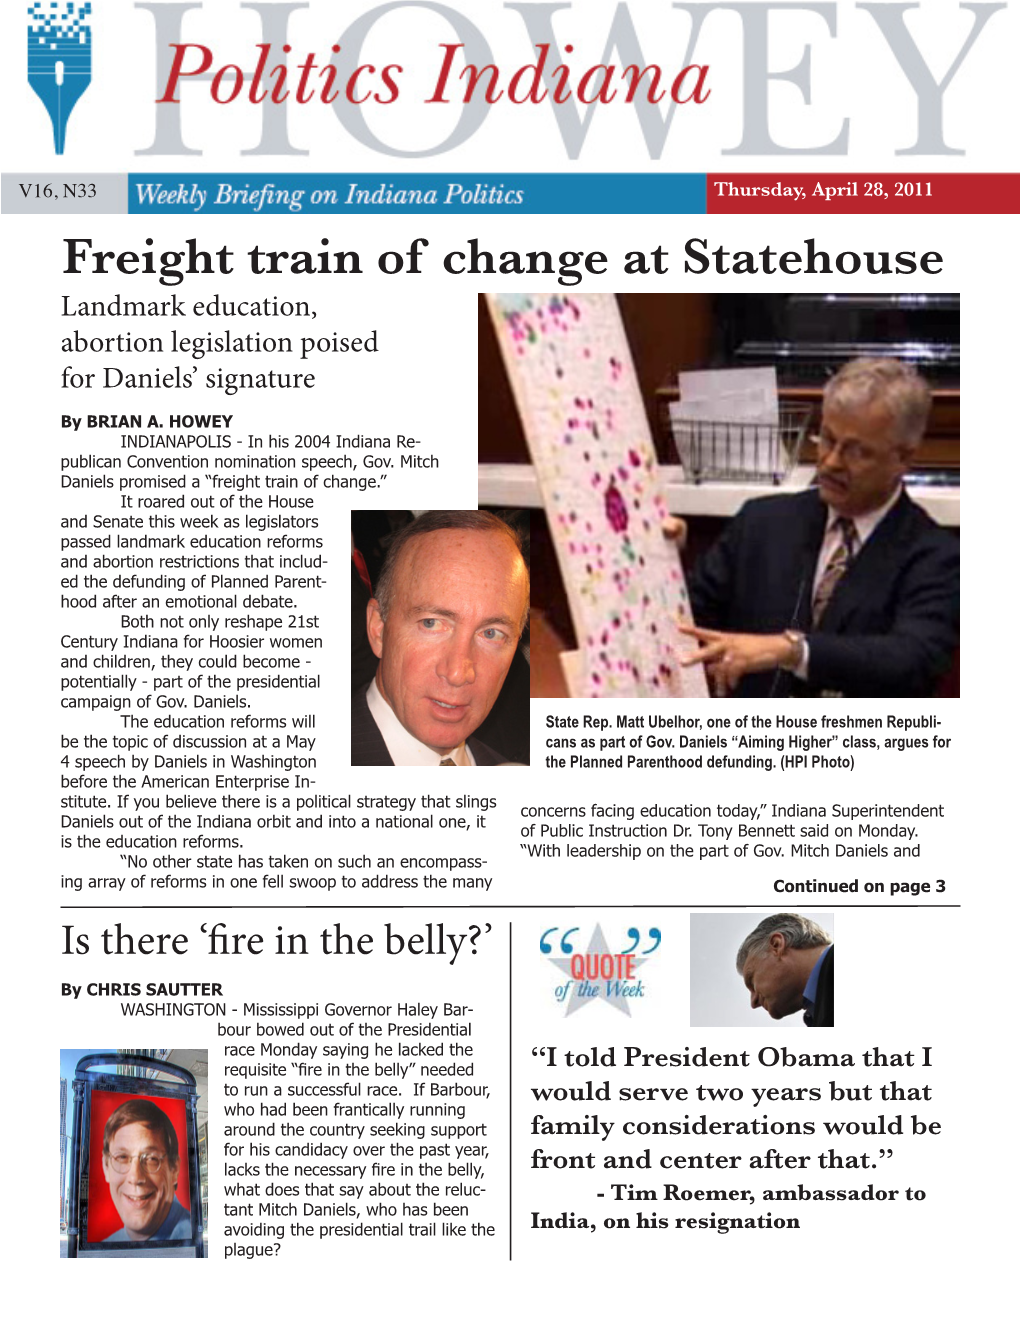 Freight Train of Change at Statehouse Landmark Education, Abortion Legislation Poised for Daniels’ Signature by BRIAN A